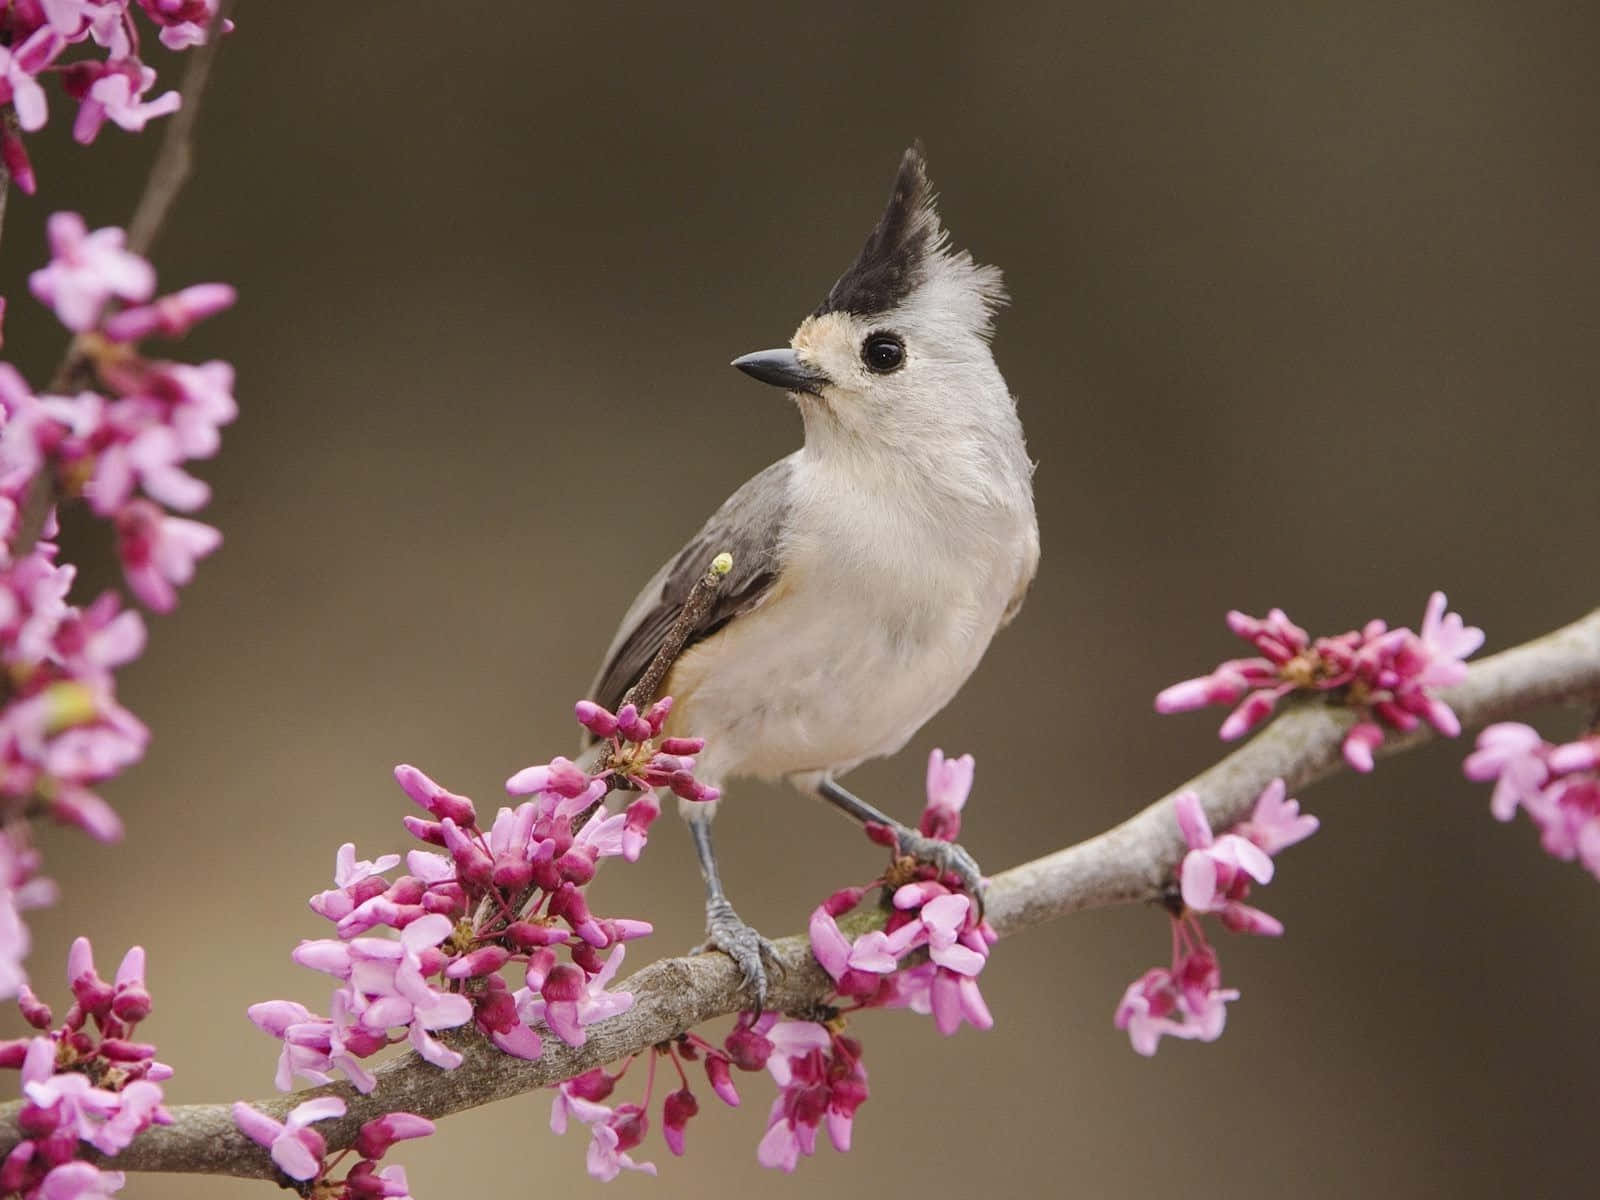 Titmouseon Blooming Branch.jpg Background